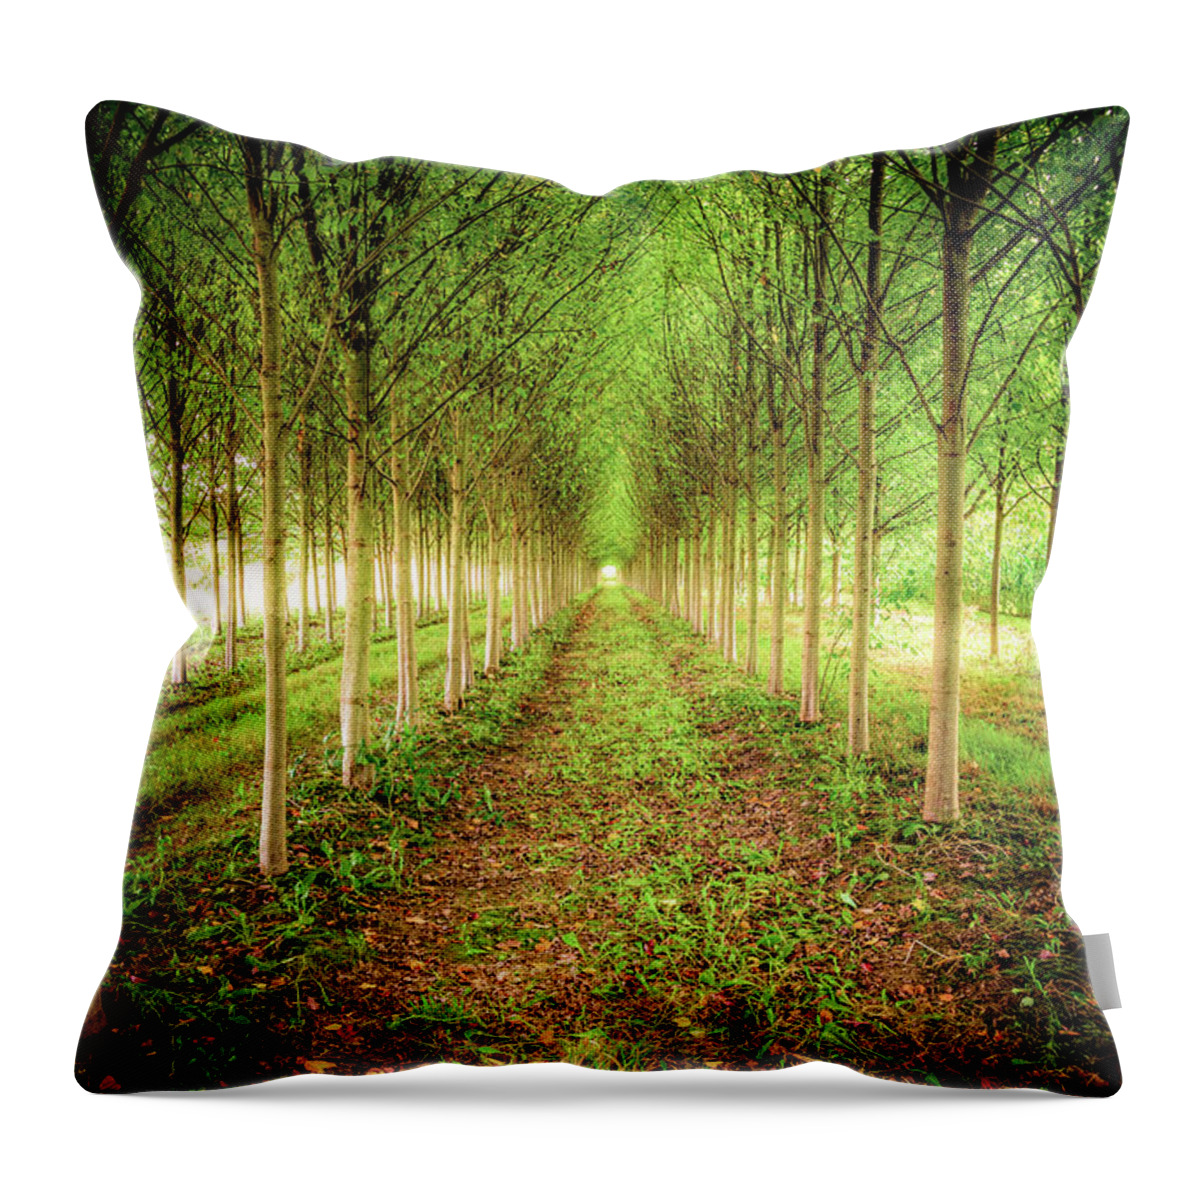 Landscape Throw Pillow featuring the photograph Craven Farms by Spencer McDonald